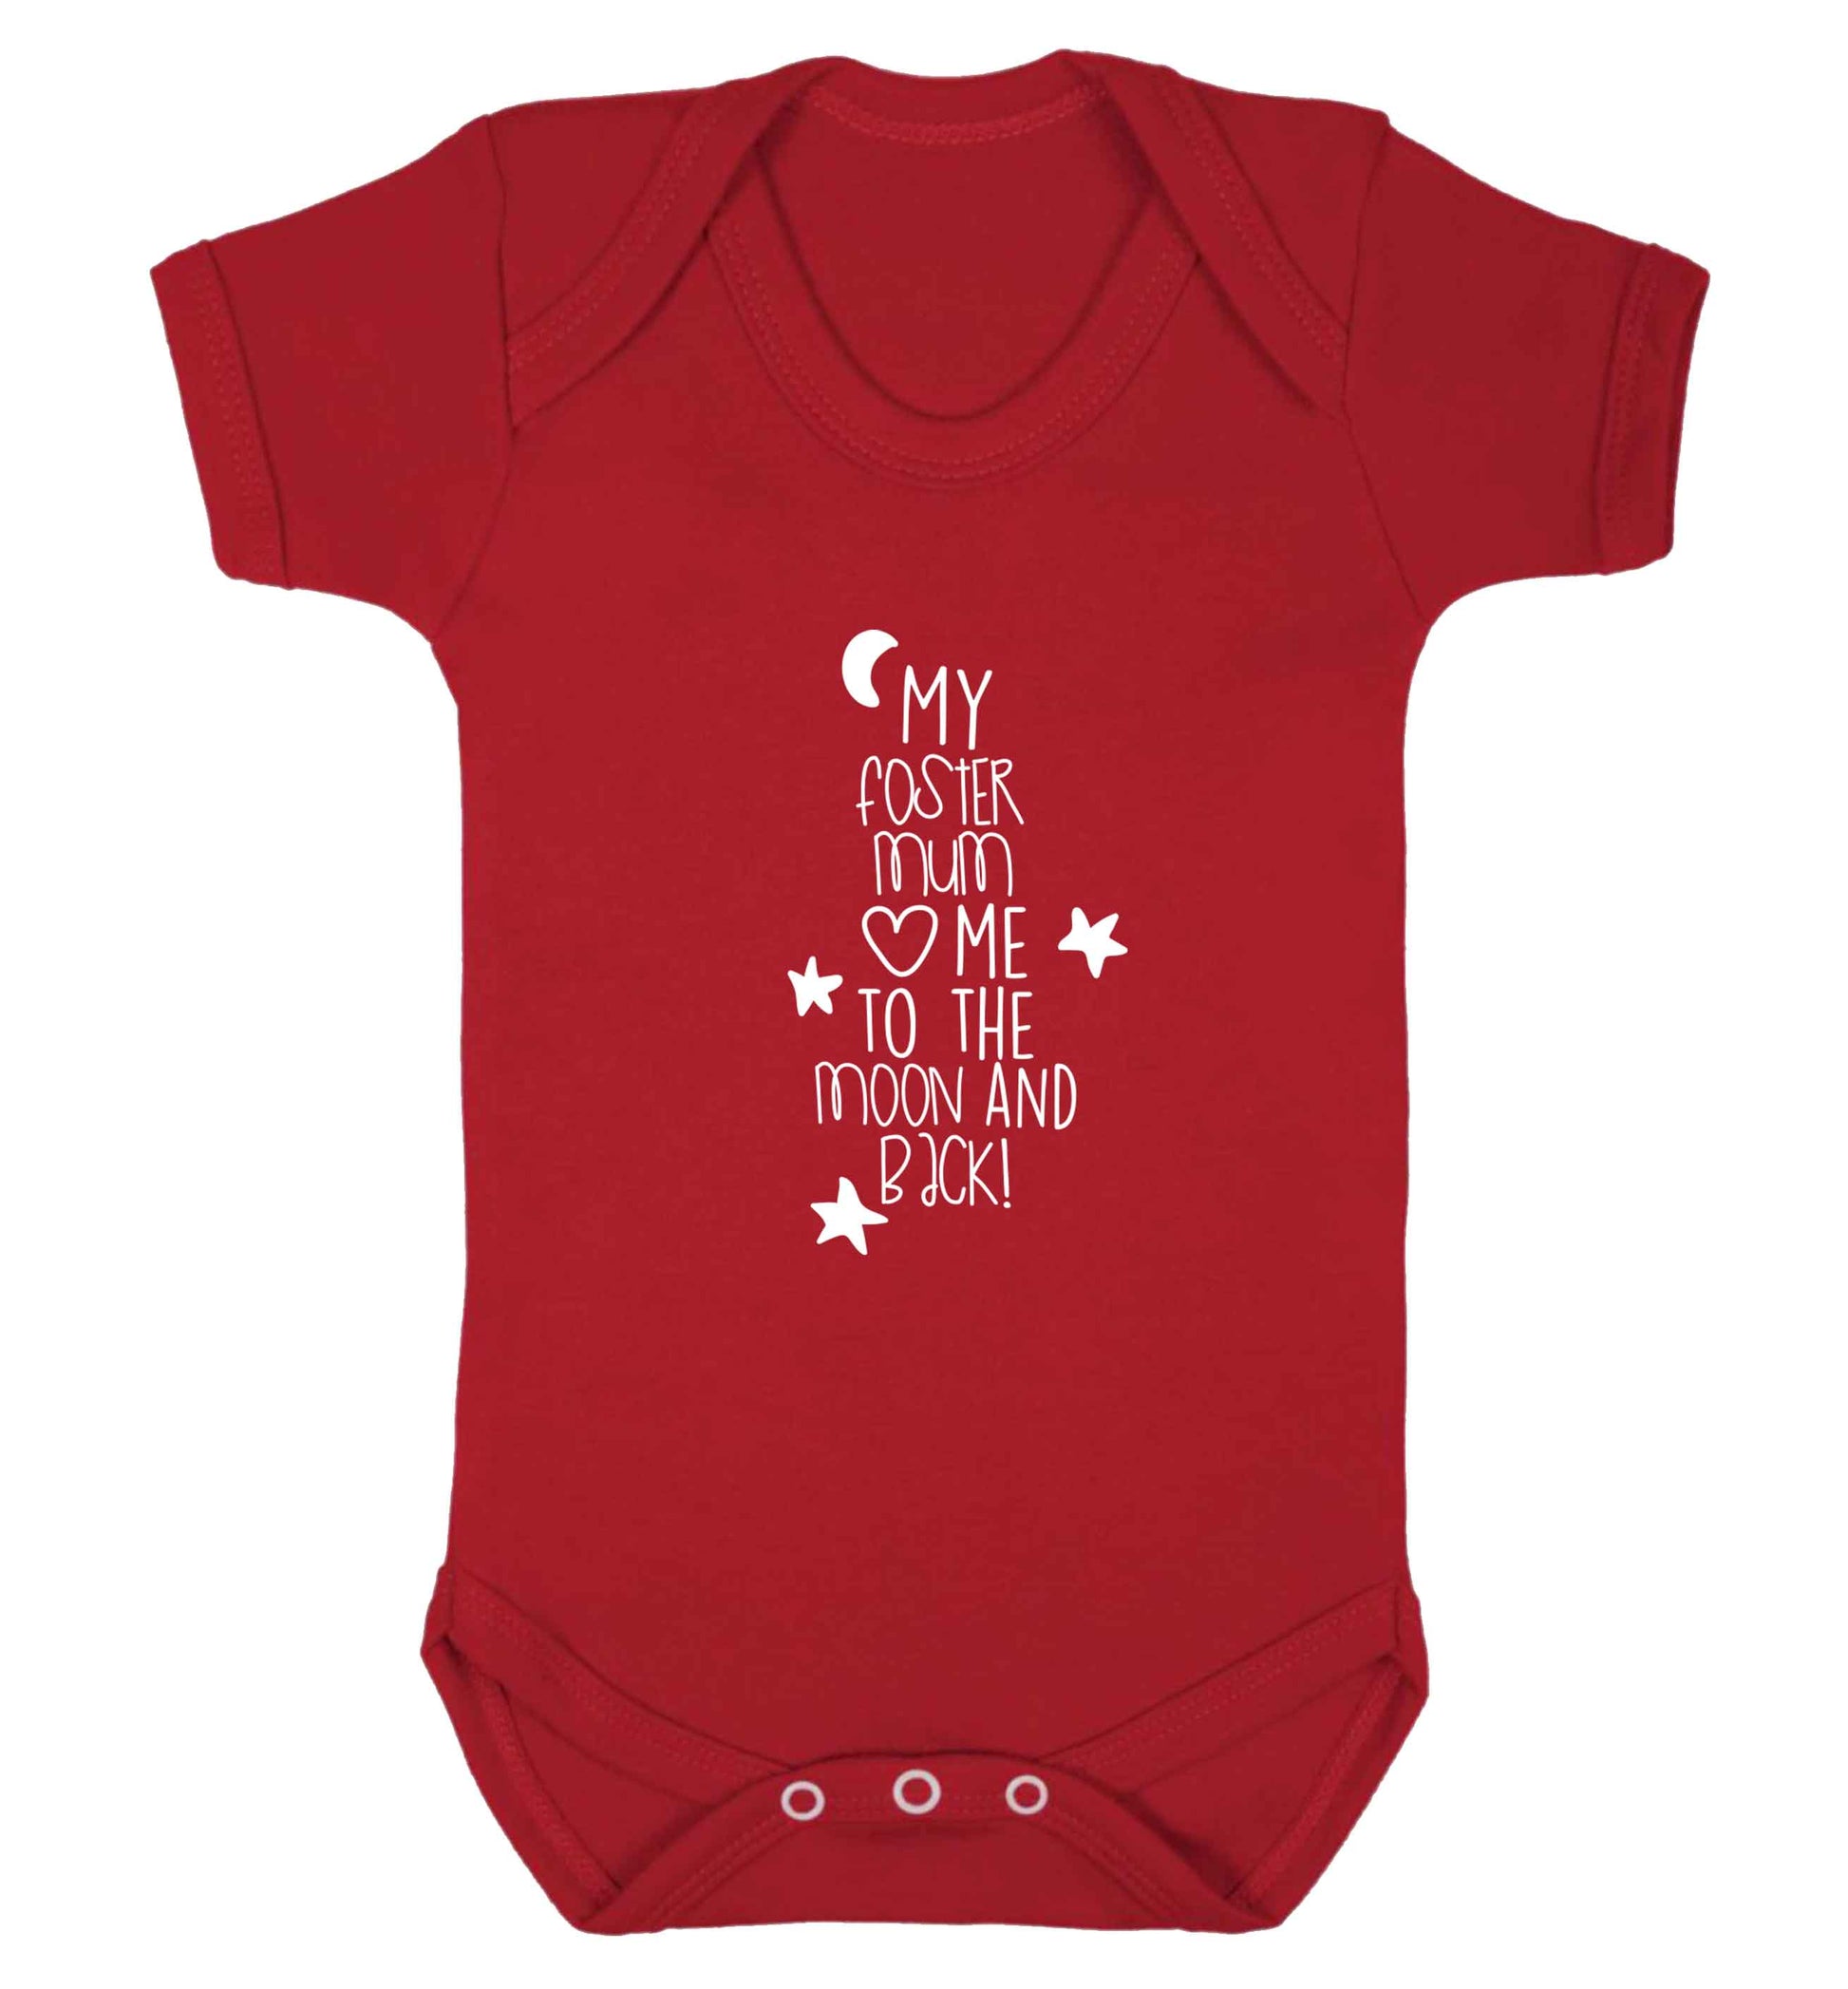 My foster mum loves me to the moon and back baby vest red 18-24 months